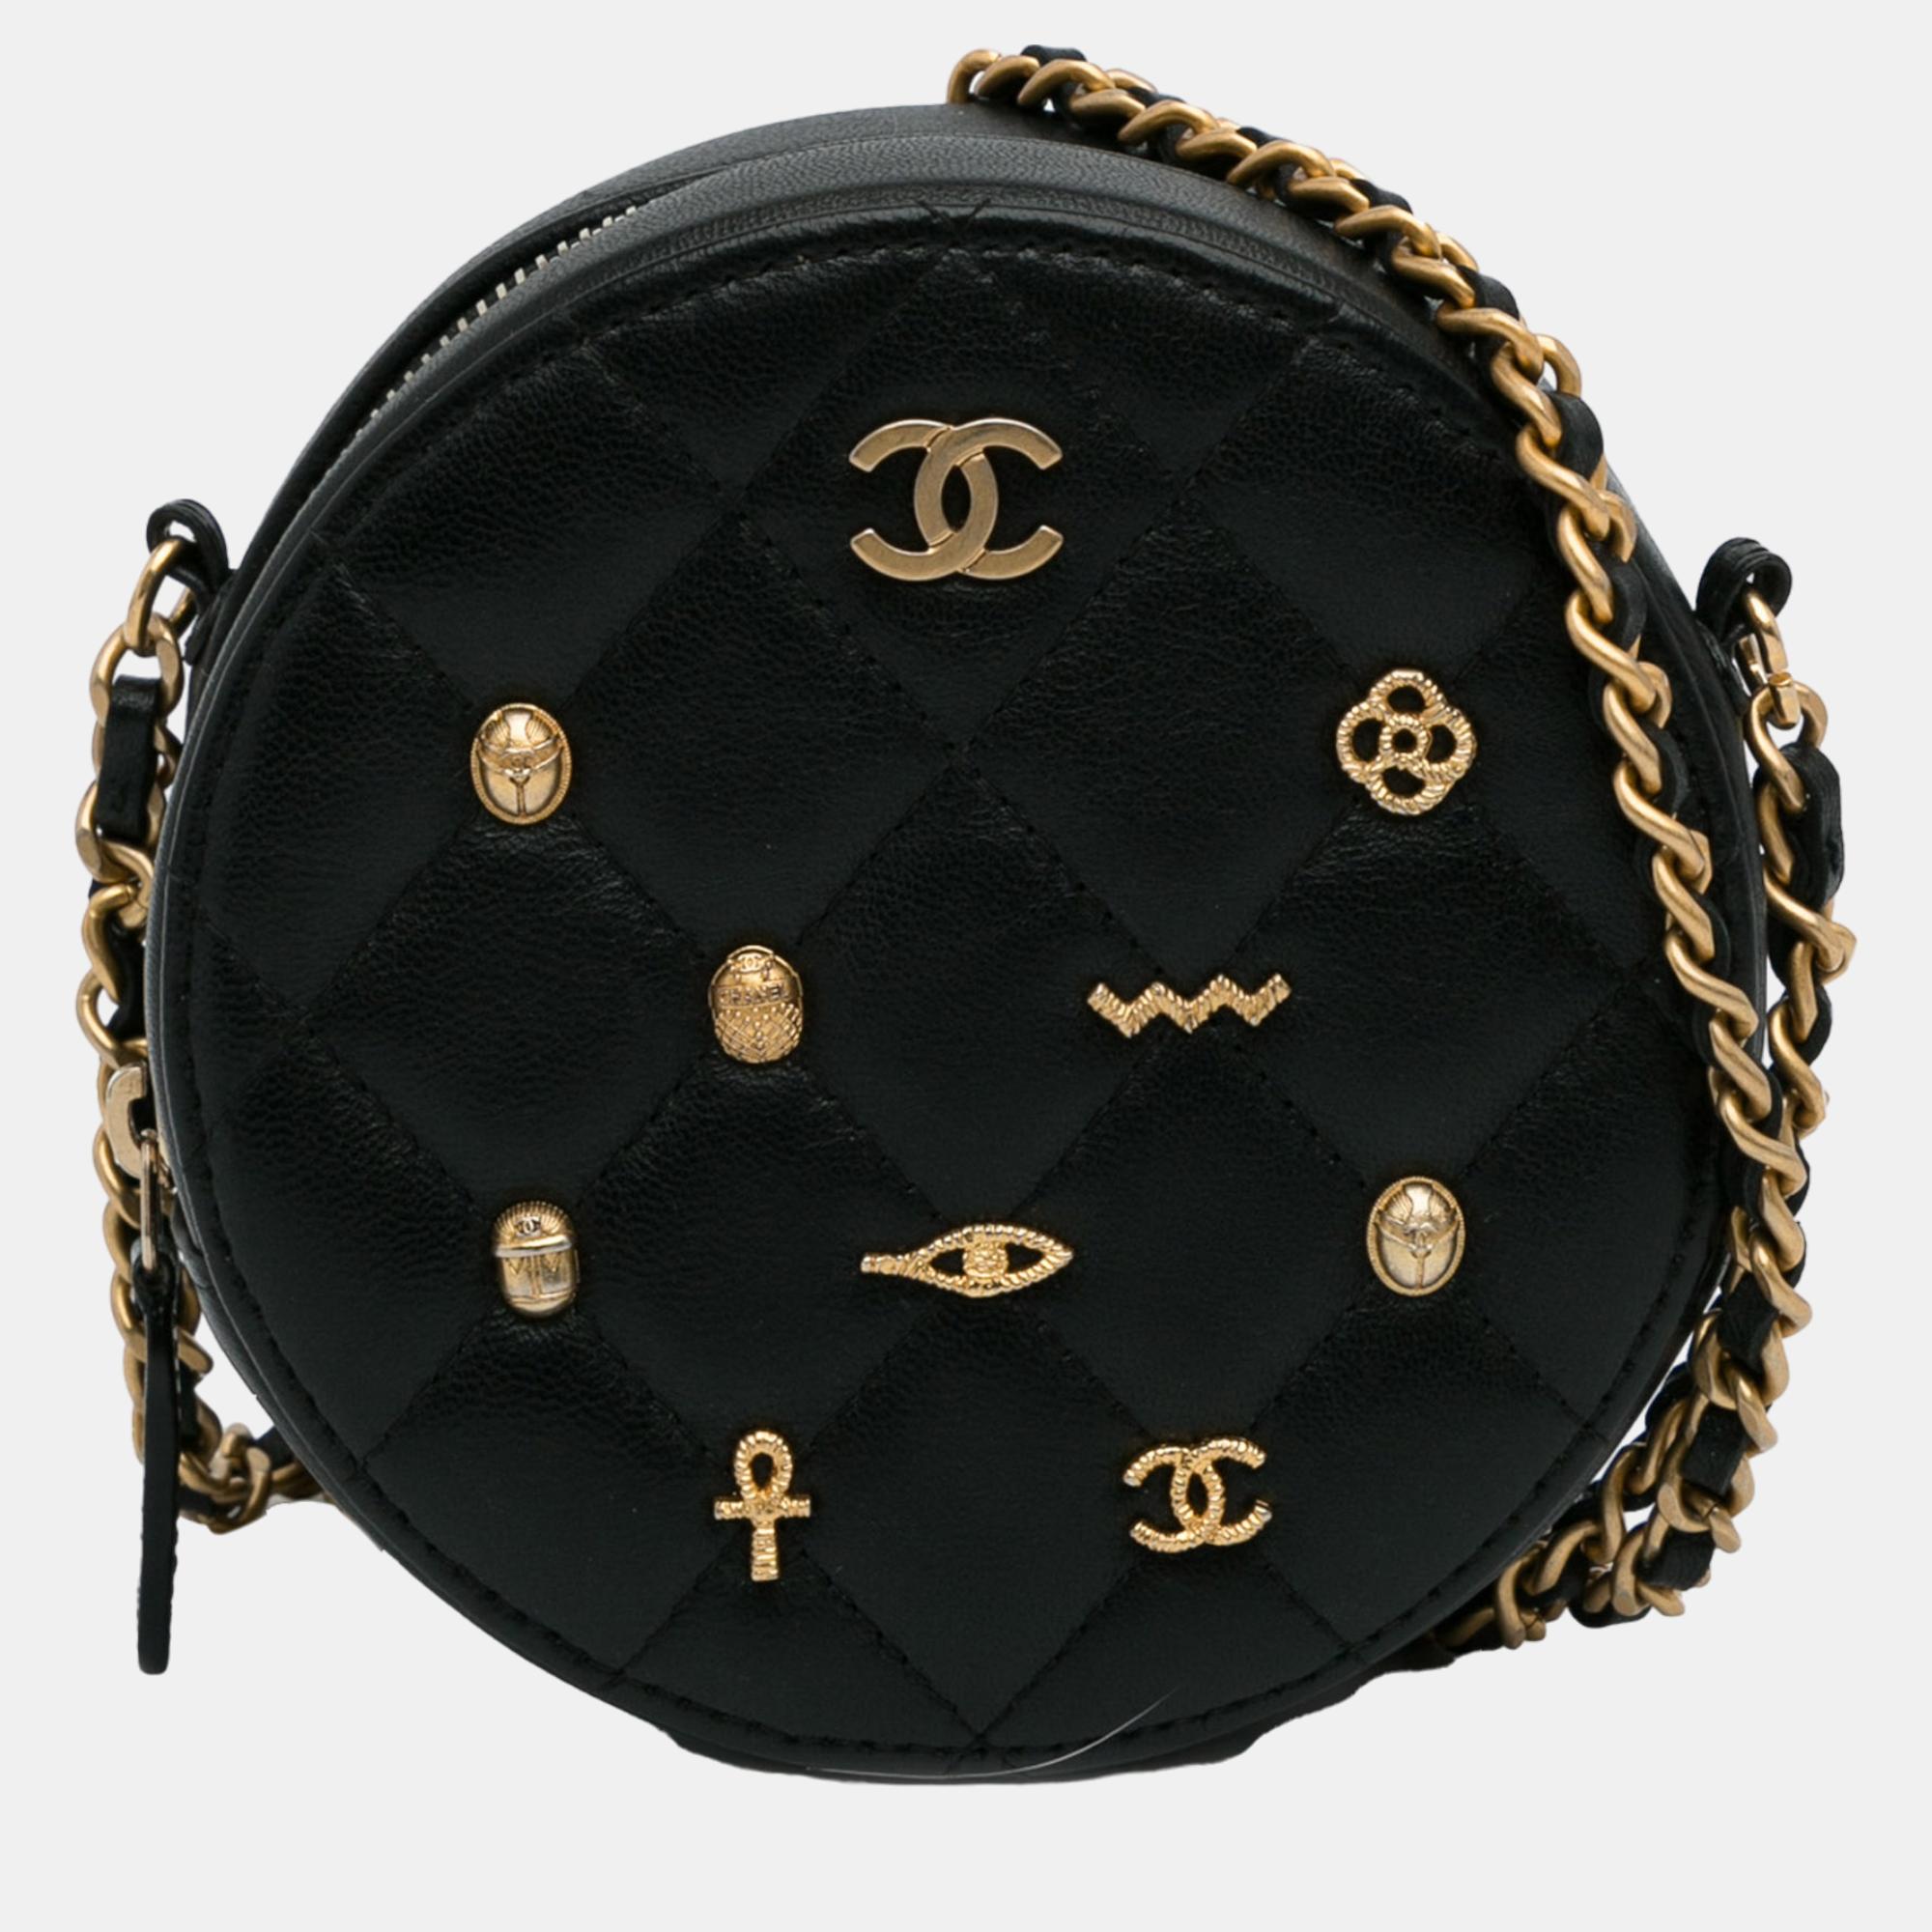 Chanel black lucky charms round crossbody bag